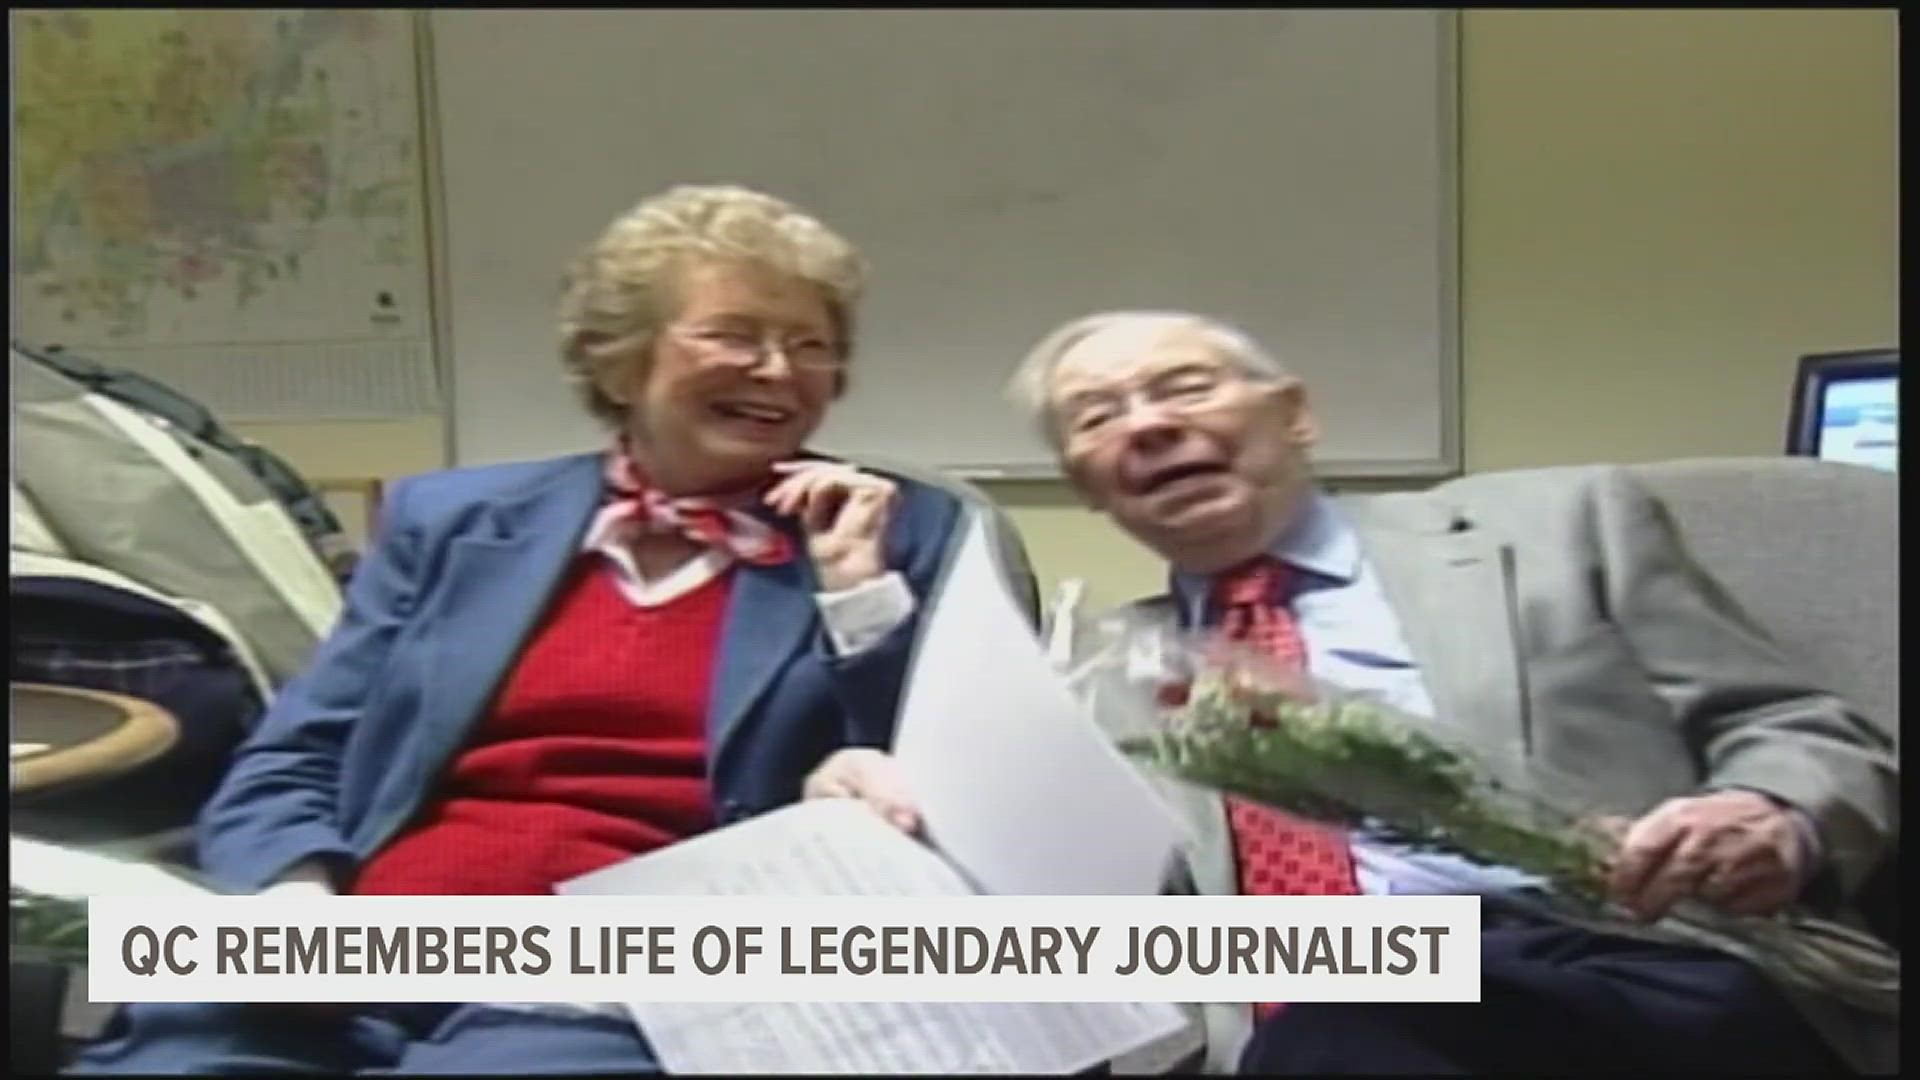 The QC legend served the area for more than 70 years and his colleagues say he had a gift for storytelling.